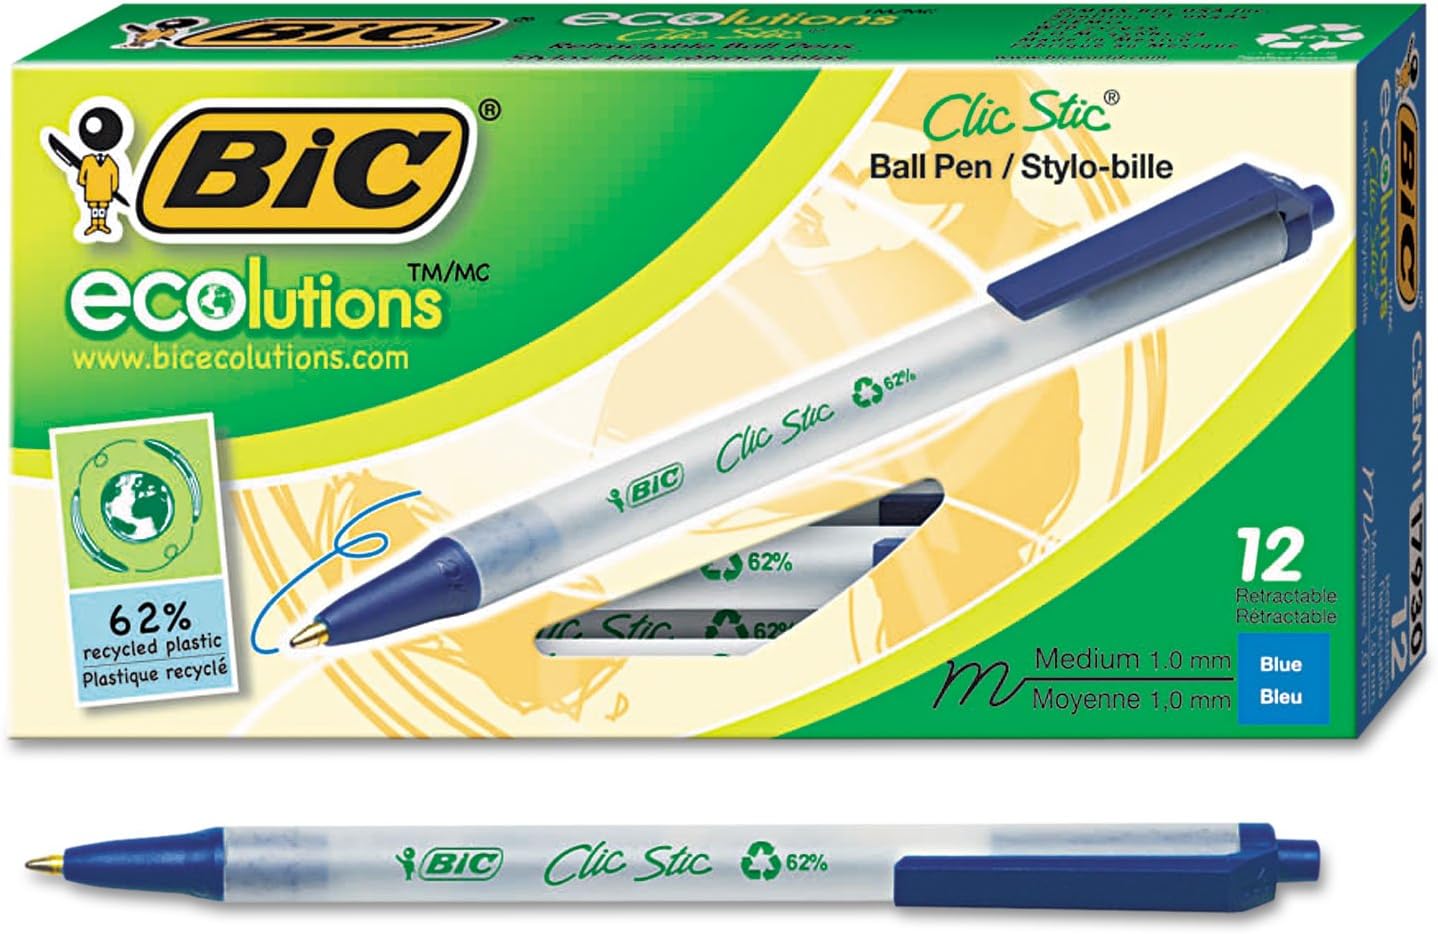 I have been using these pens for years. These pens are great quality and I love writing with these pens.